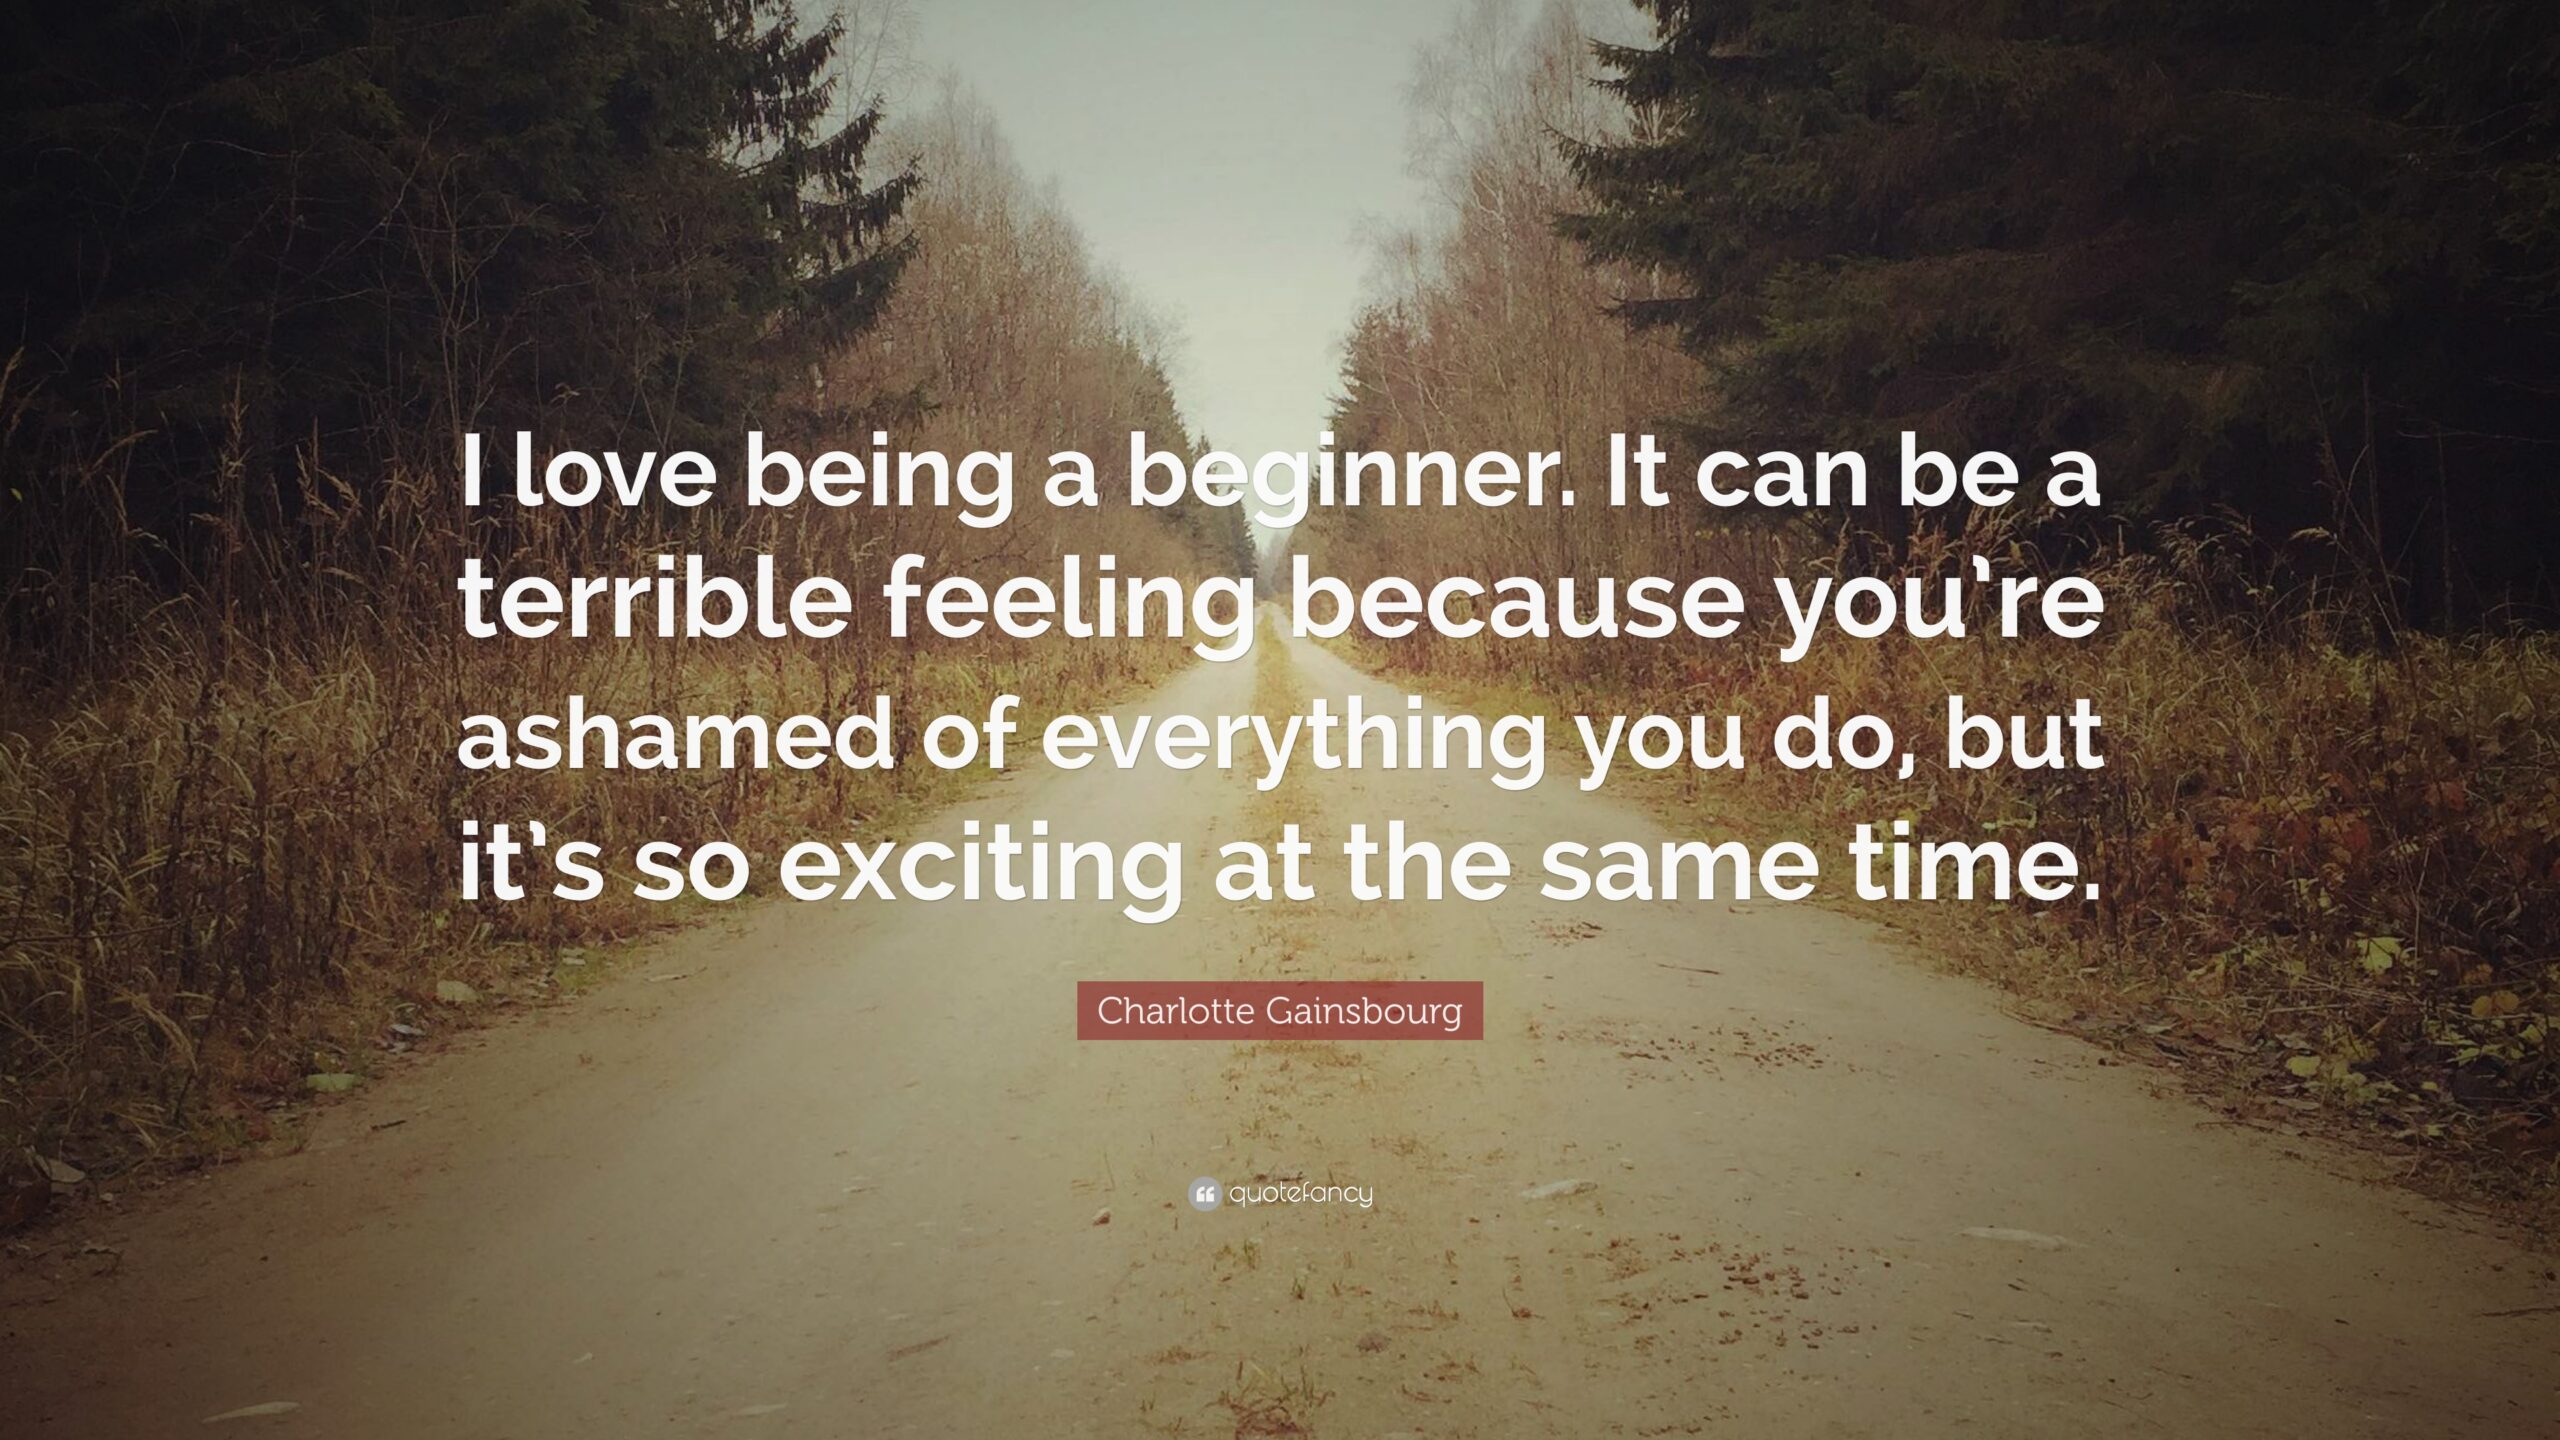 Chase the Discomfort of Being a Beginner